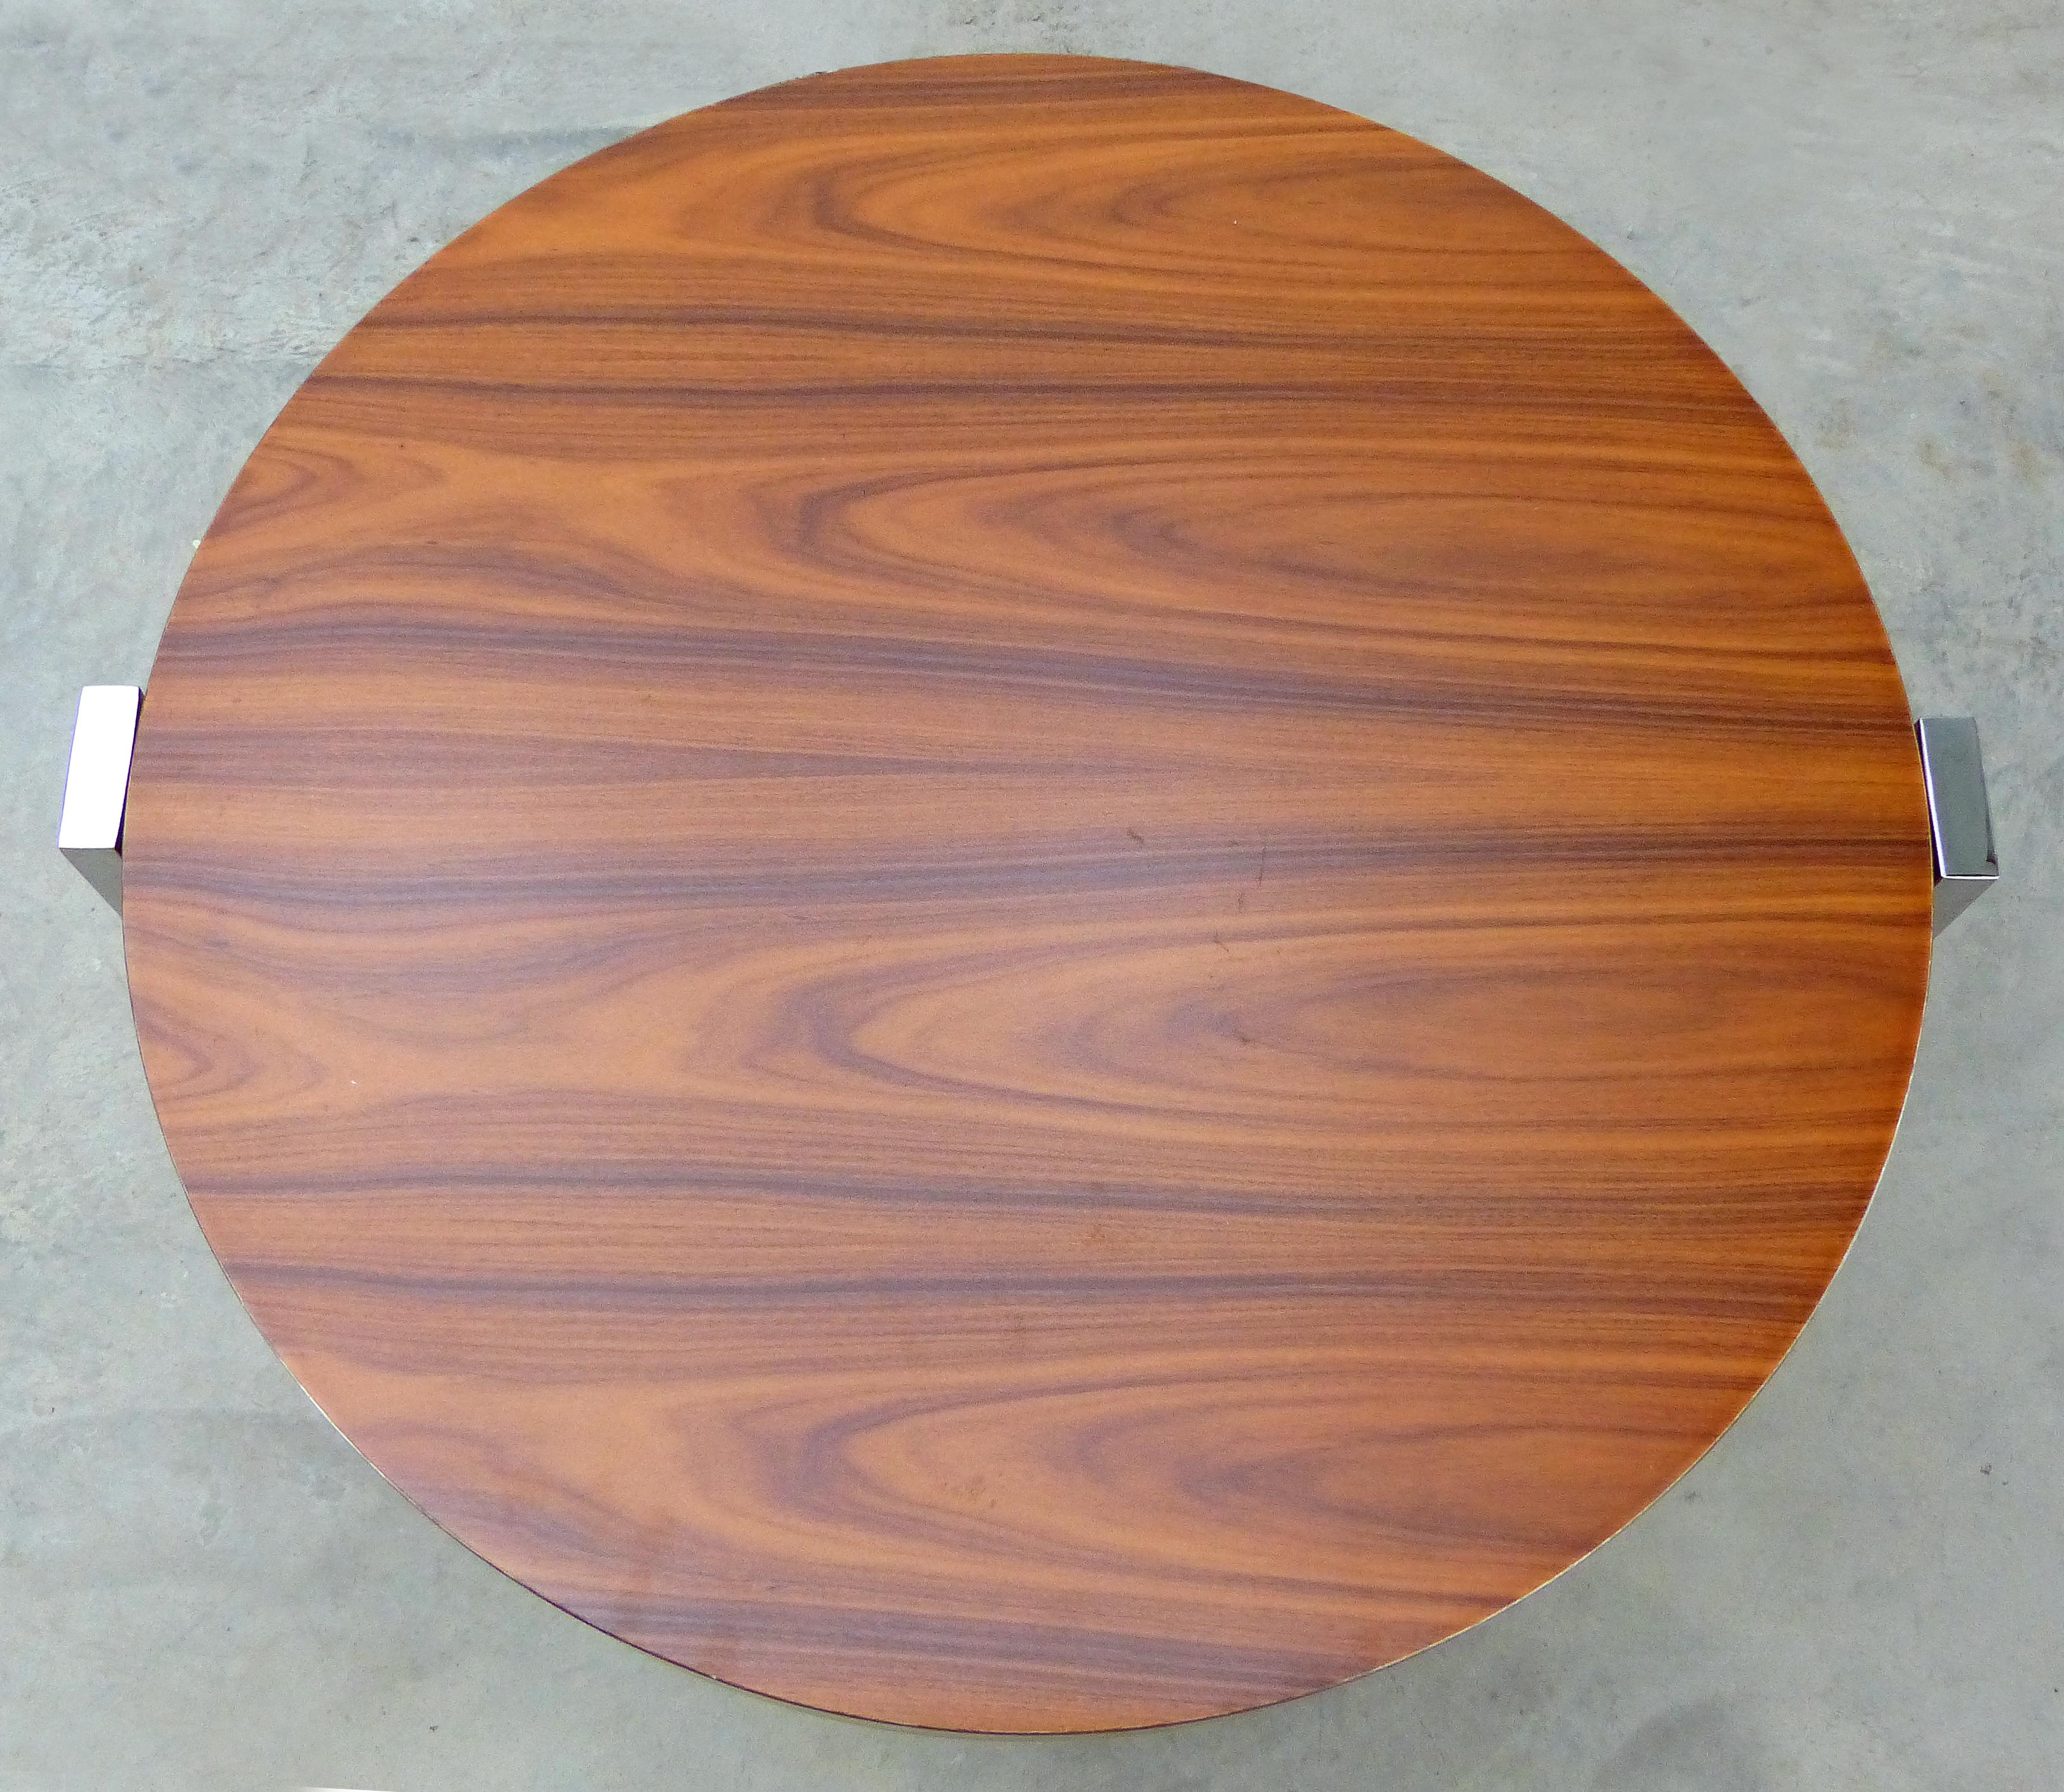 Mobilidea Round Side Table In Good Condition For Sale In Miami, FL